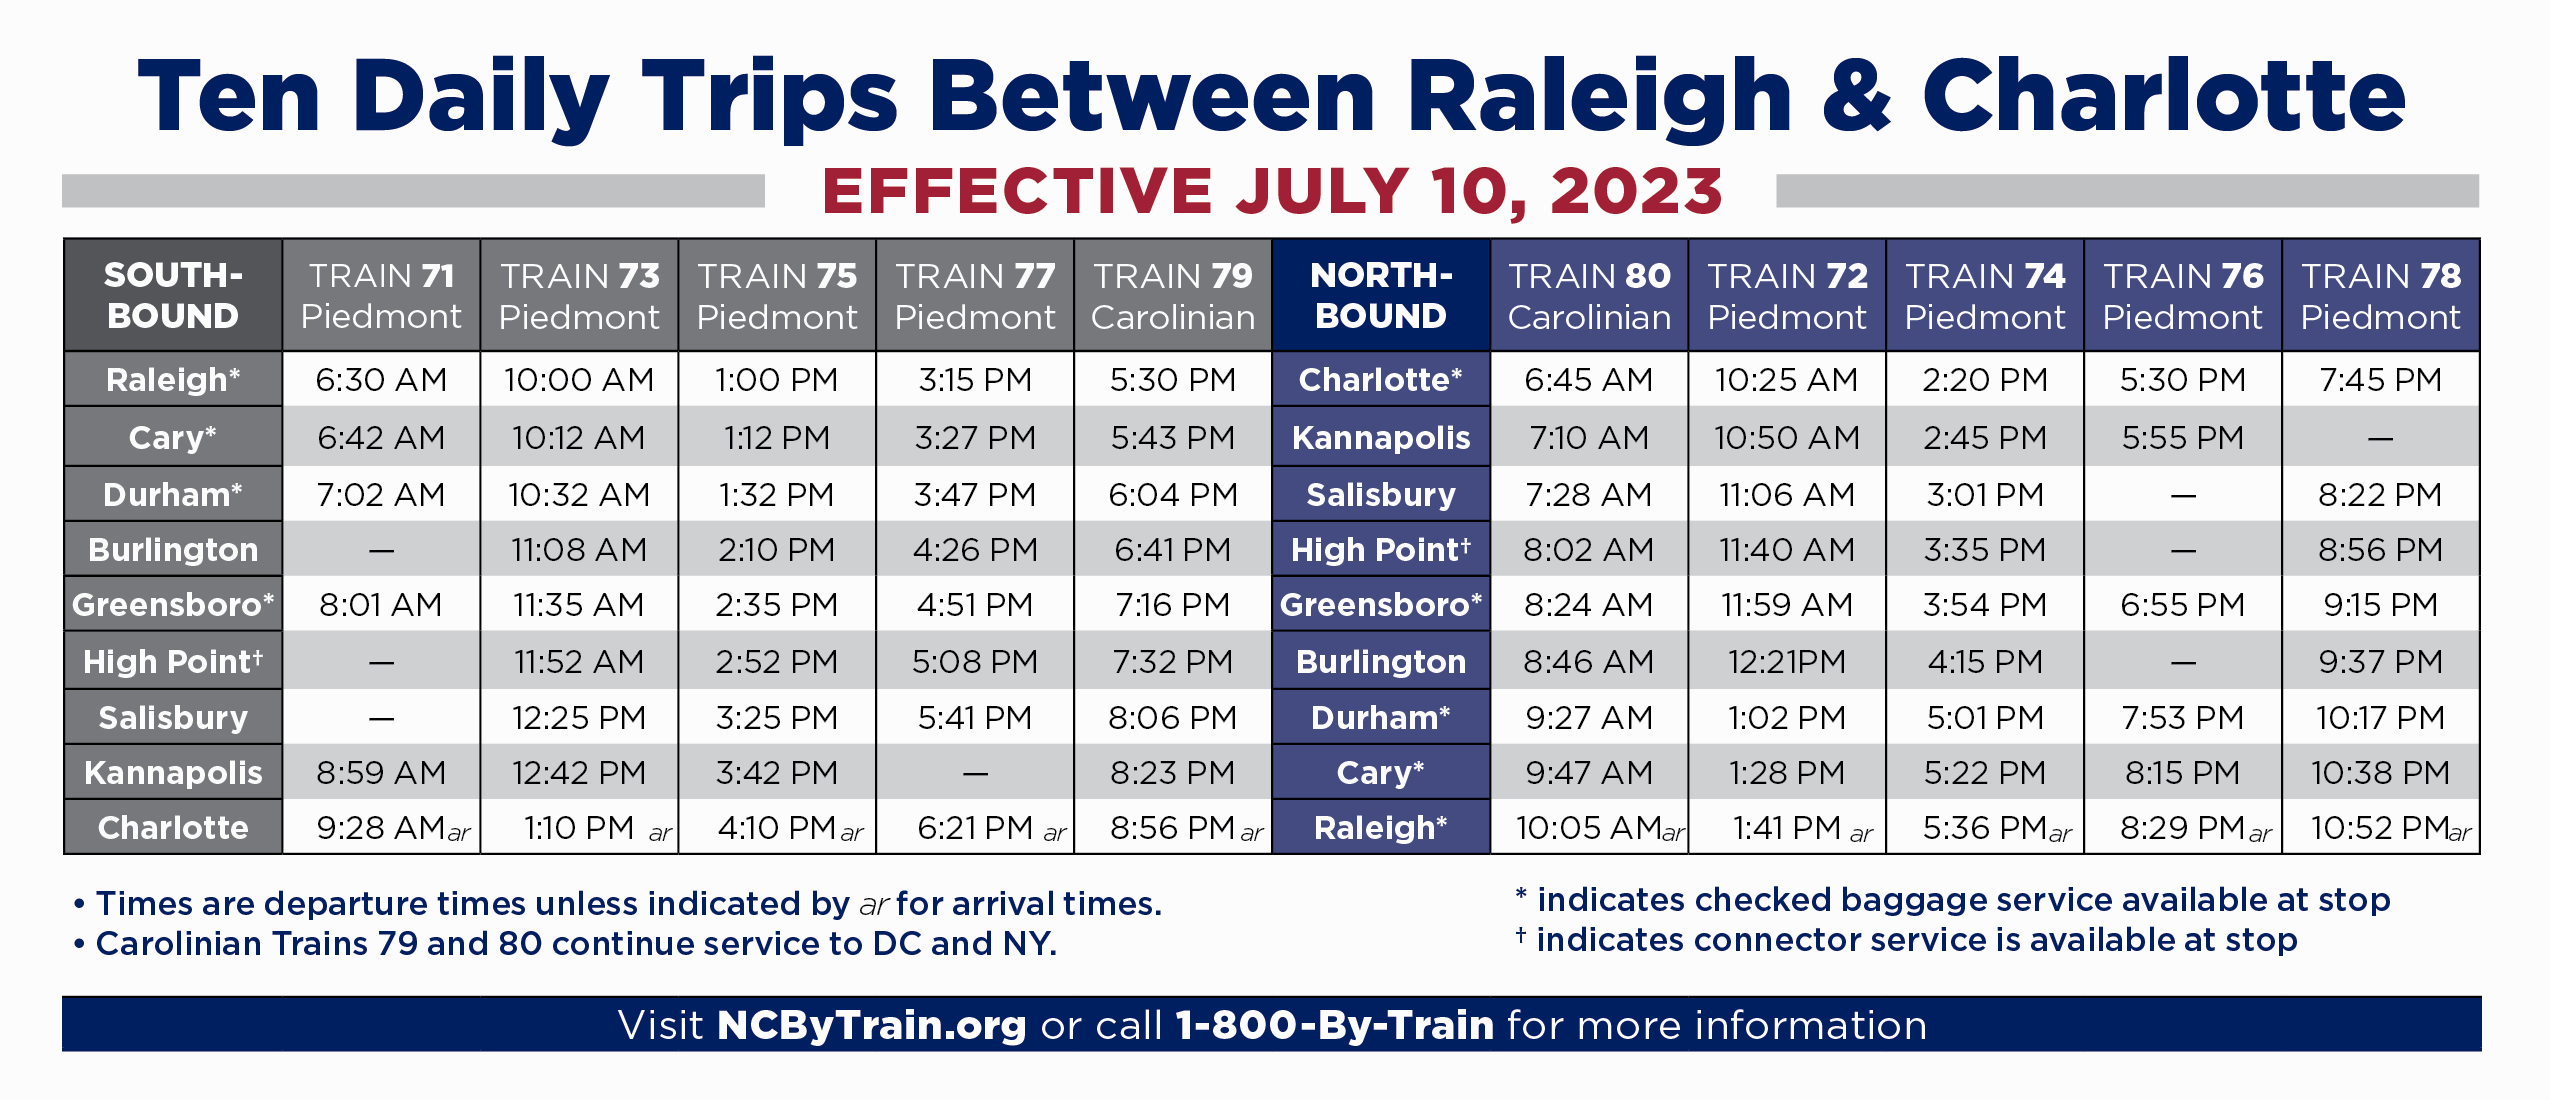 New schedule and trains begin in July